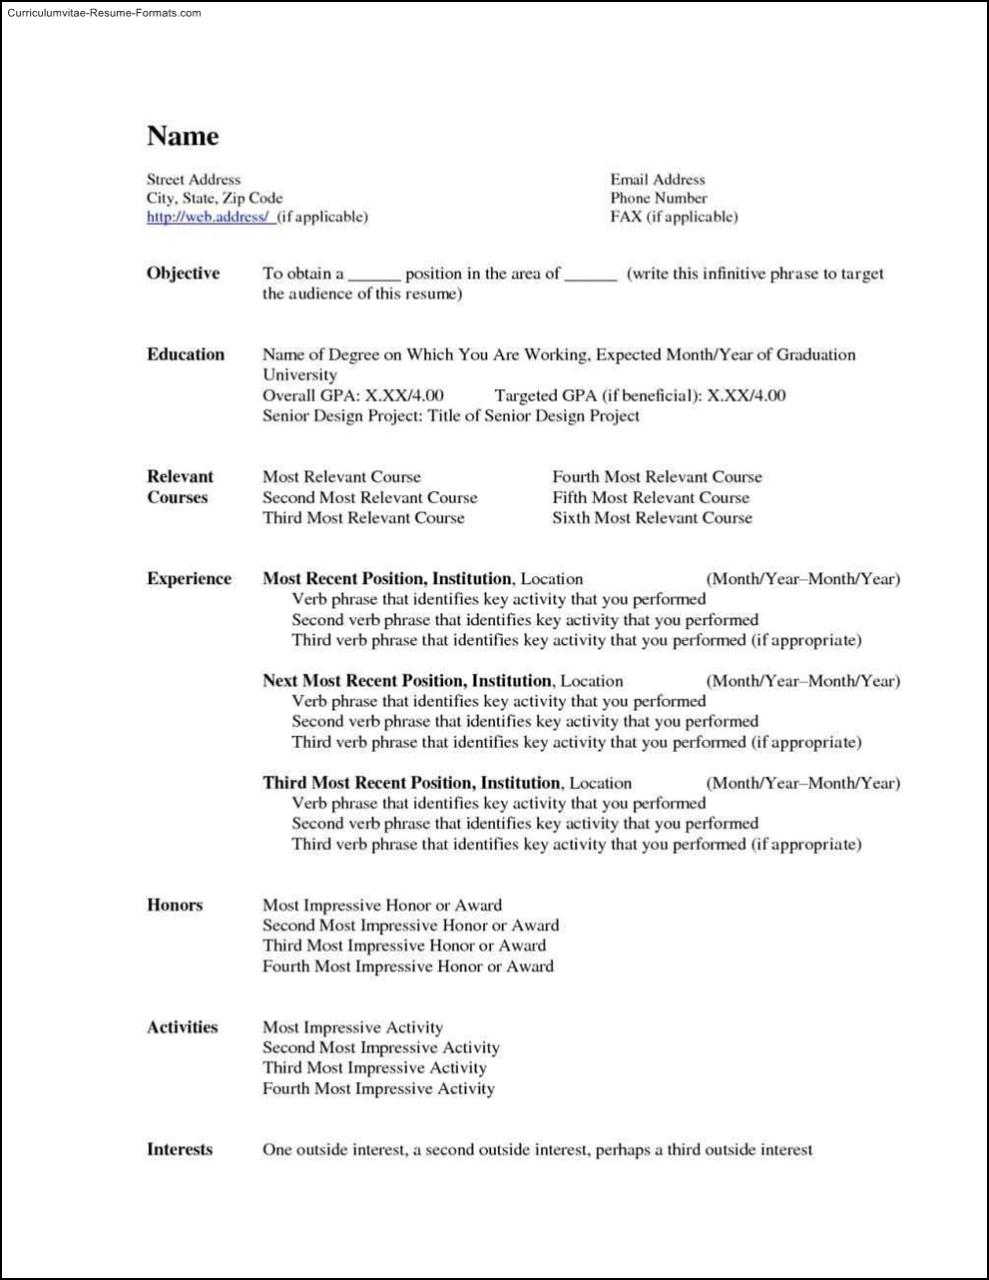 resume-templates-the-best-resume-format-and-how-to-build-it-in-word